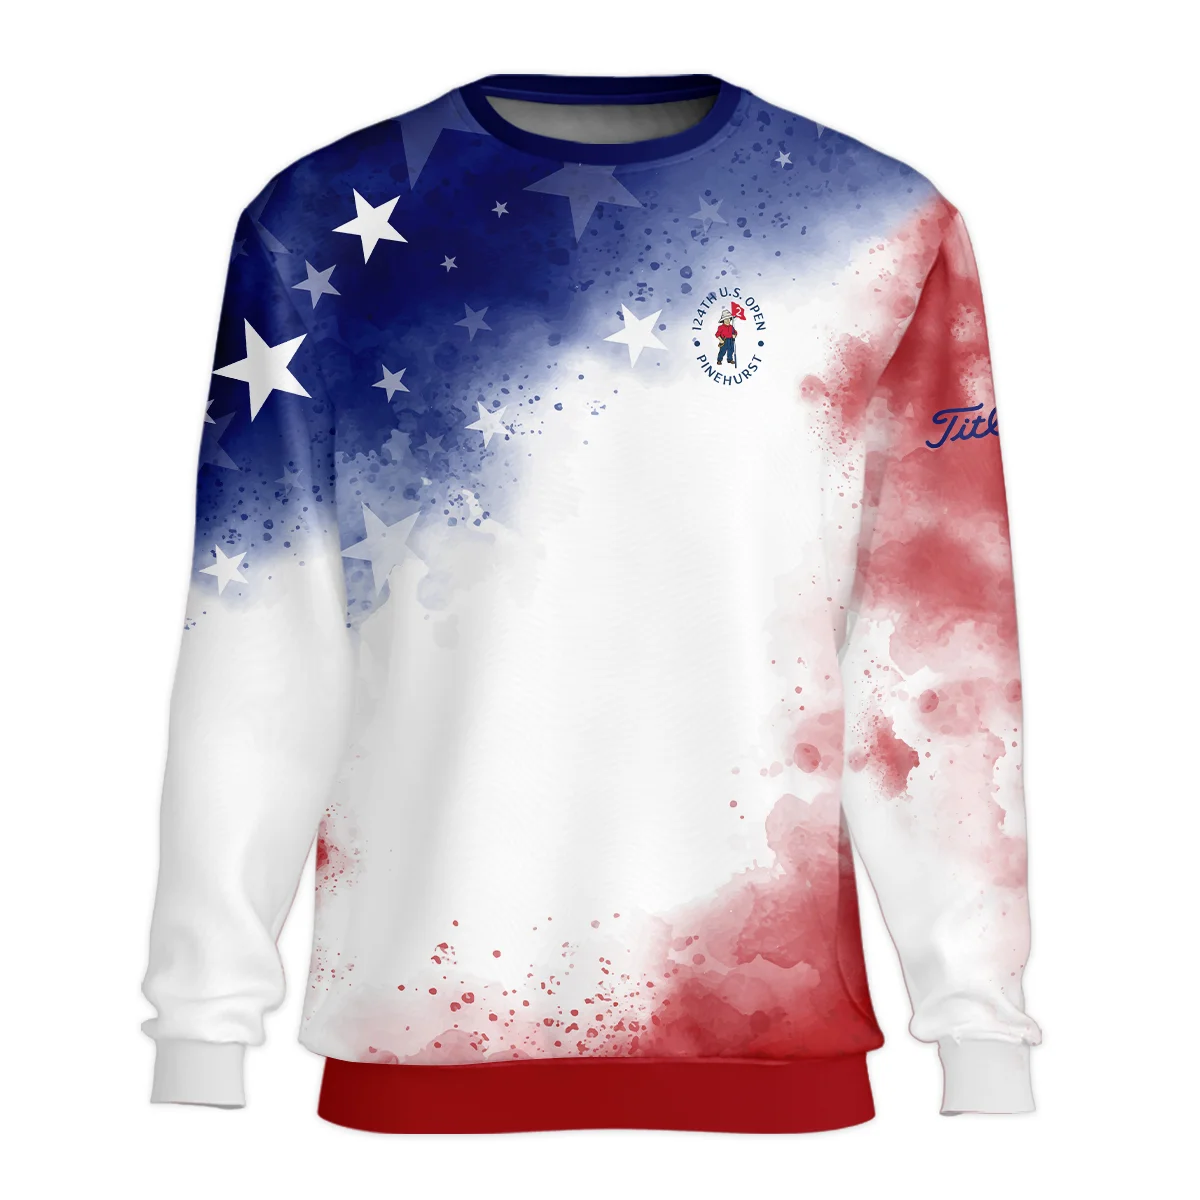 124th U.S. Open Pinehurst Titleist Blue Red Watercolor Star White Backgound Polo Shirt Style Classic Polo Shirt For Men